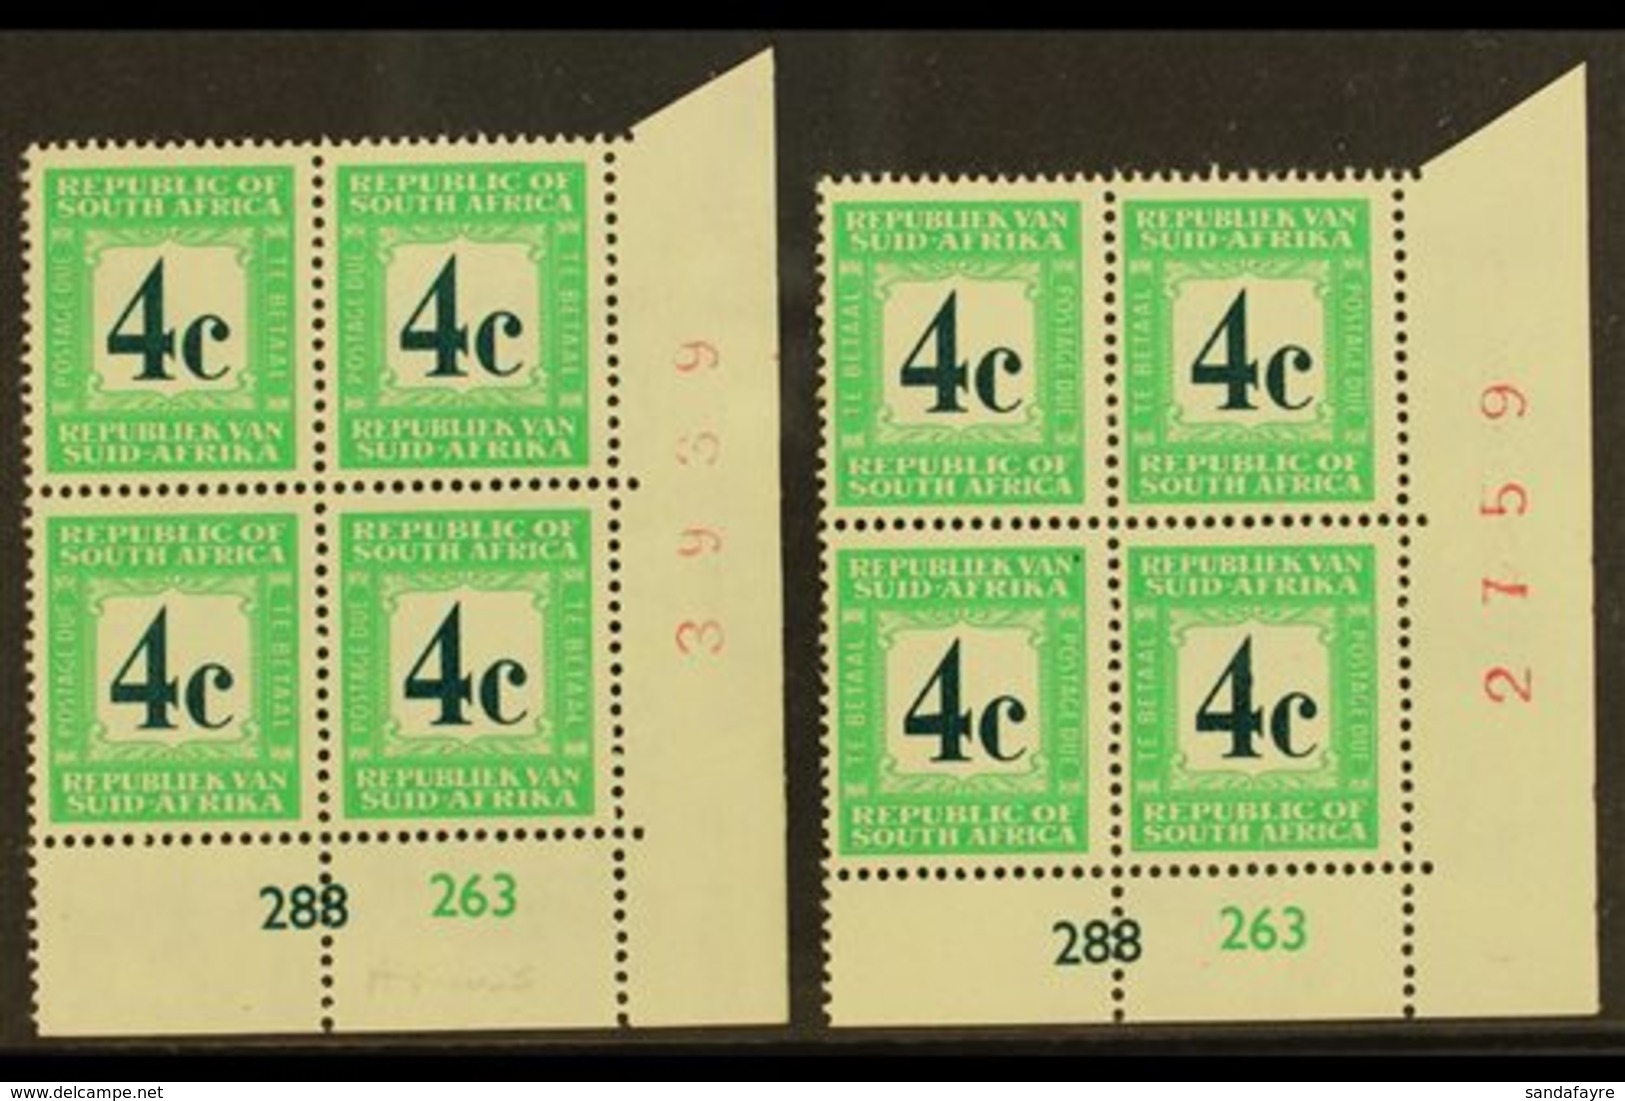 POSTAGE DUES 1961-9 4c Deep Myrtle-green & Light Emerald, Cylinder Blocks Of 4 Of Each Language Setting, SG D54, 54a, Ne - Unclassified